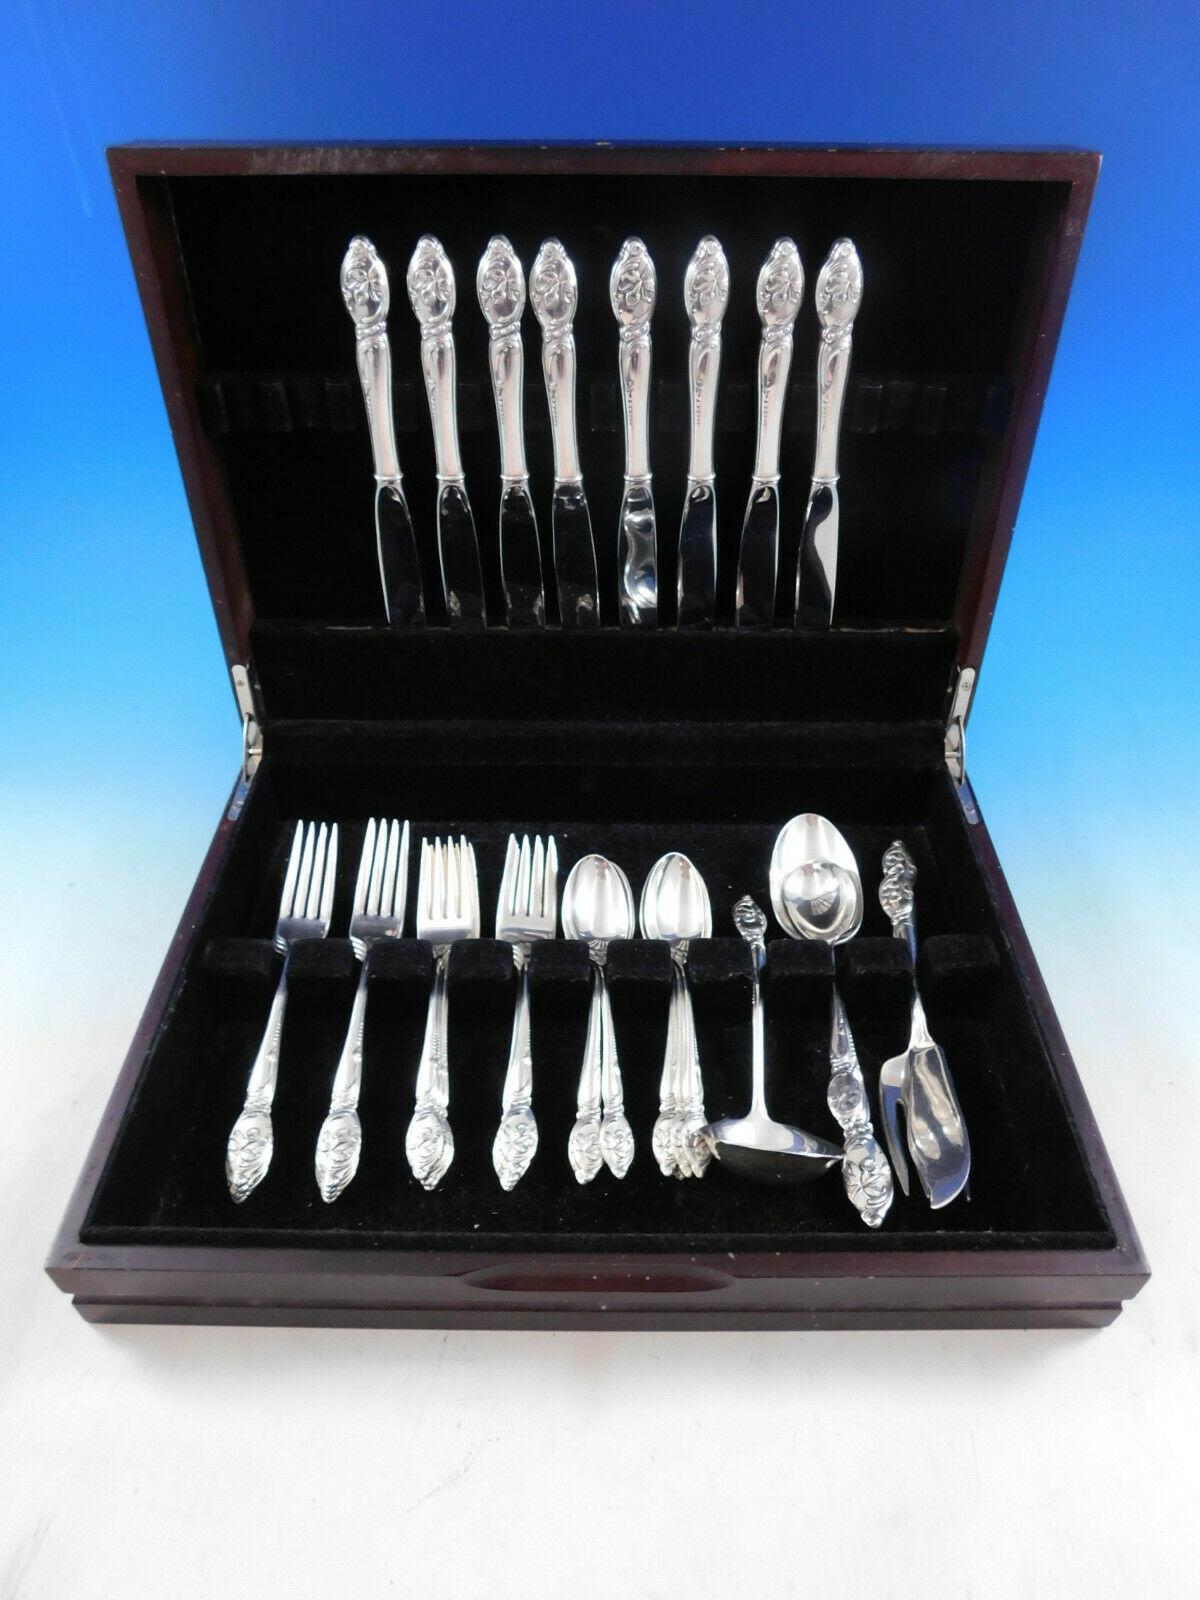 Enchanting Orchid by Westmorland sterling silver Flatware set - 37 Pieces. This set includes:


8 Knives, 9 1/8